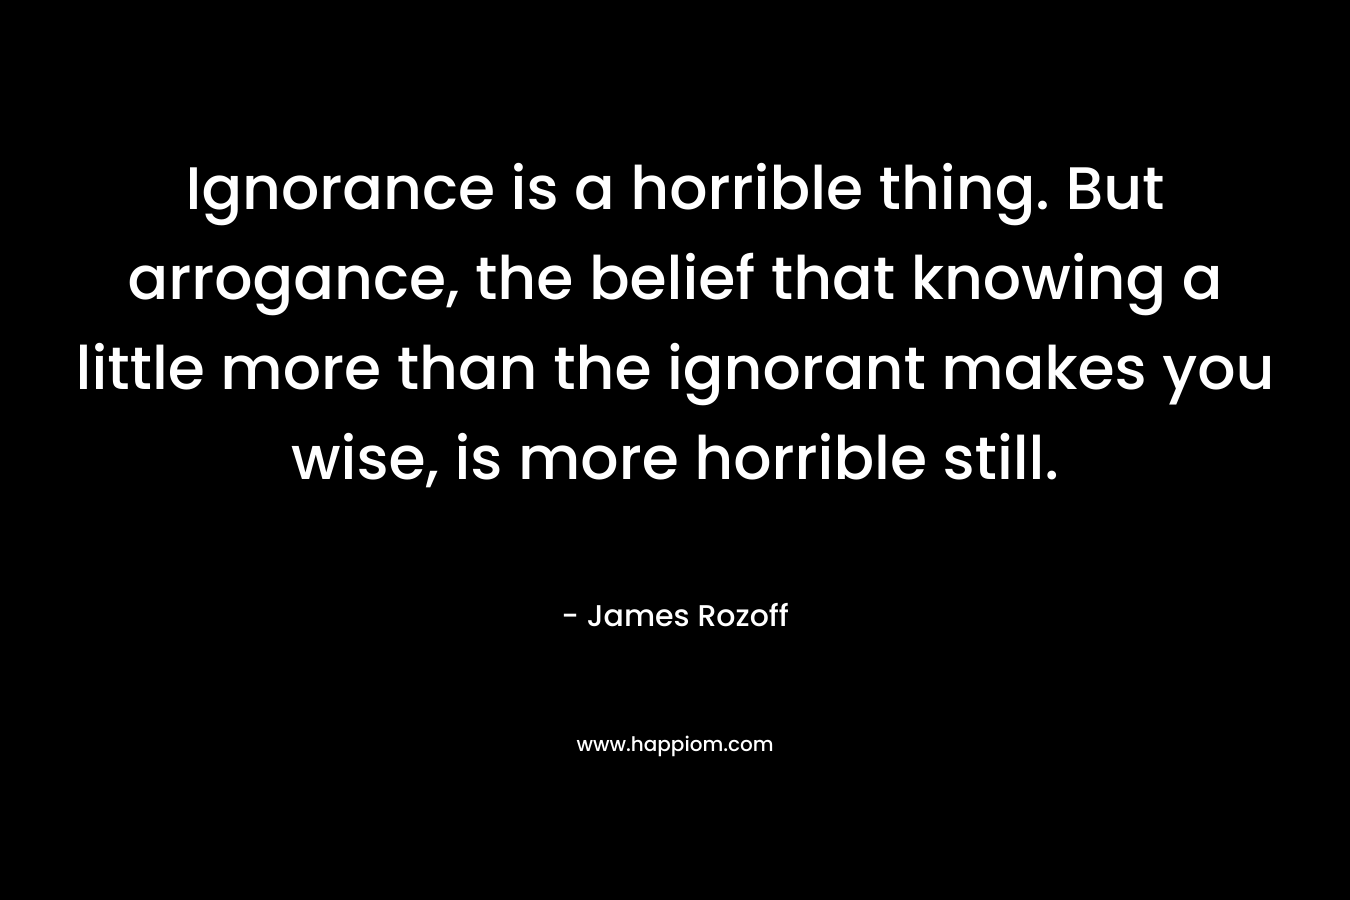 Ignorance is a horrible thing. But arrogance, the belief that knowing a little more than the ignorant makes you wise, is more horrible still. – James Rozoff